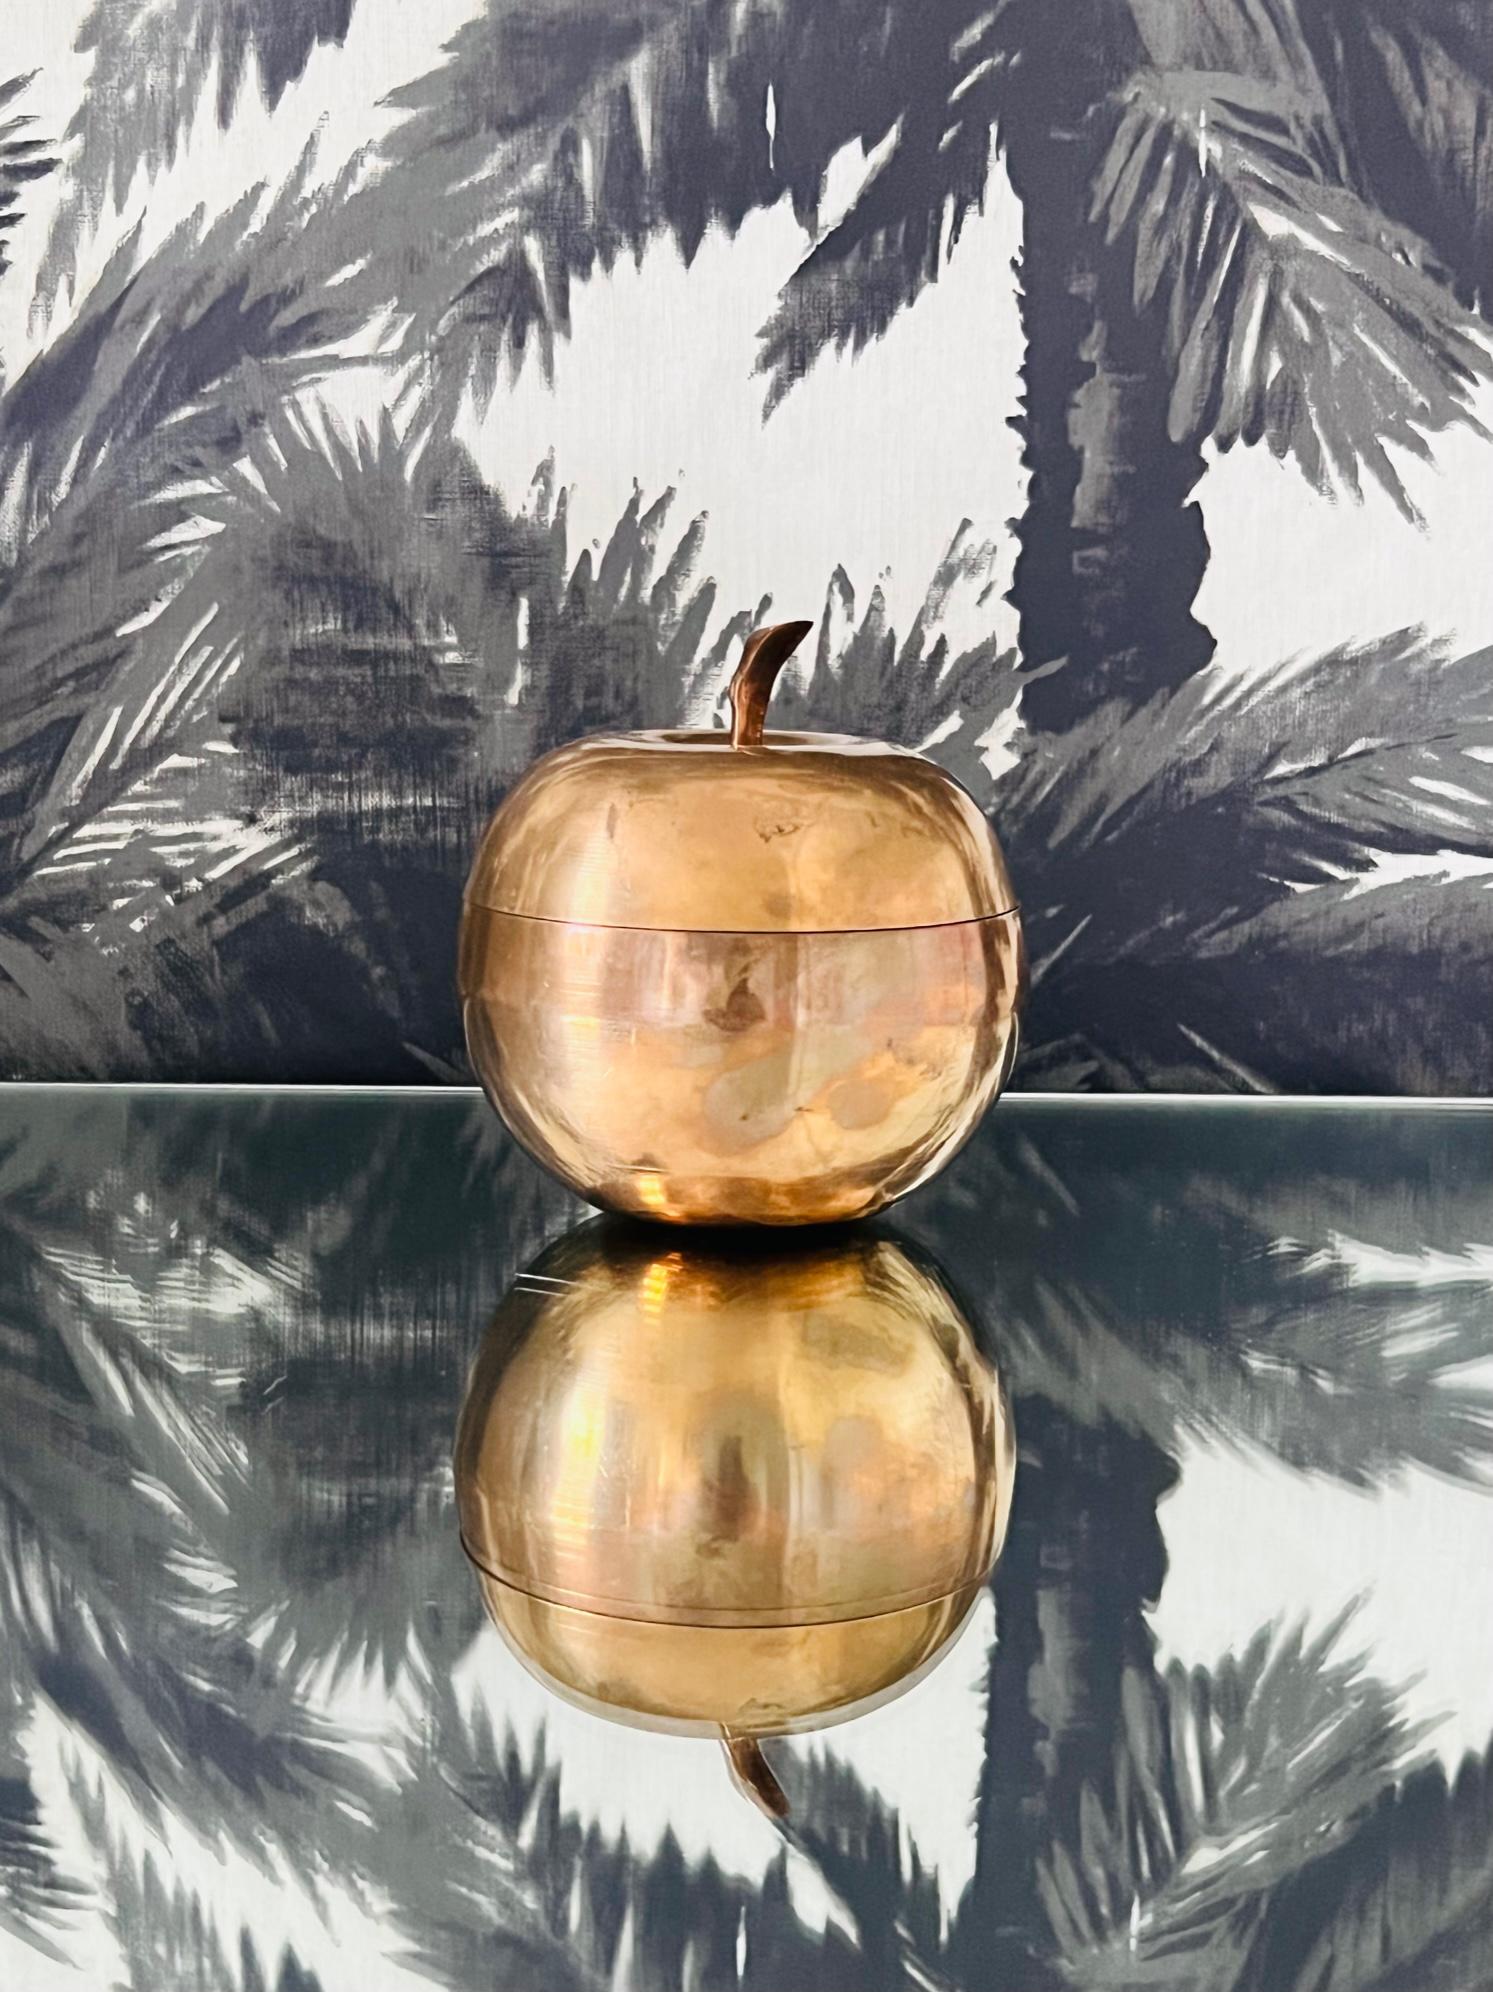 1970's Italian decorative container or trinket box of an apple in patinated brass metal with a lidded top with copper colored undertones. Makes a chic desk accessory or decorative object.